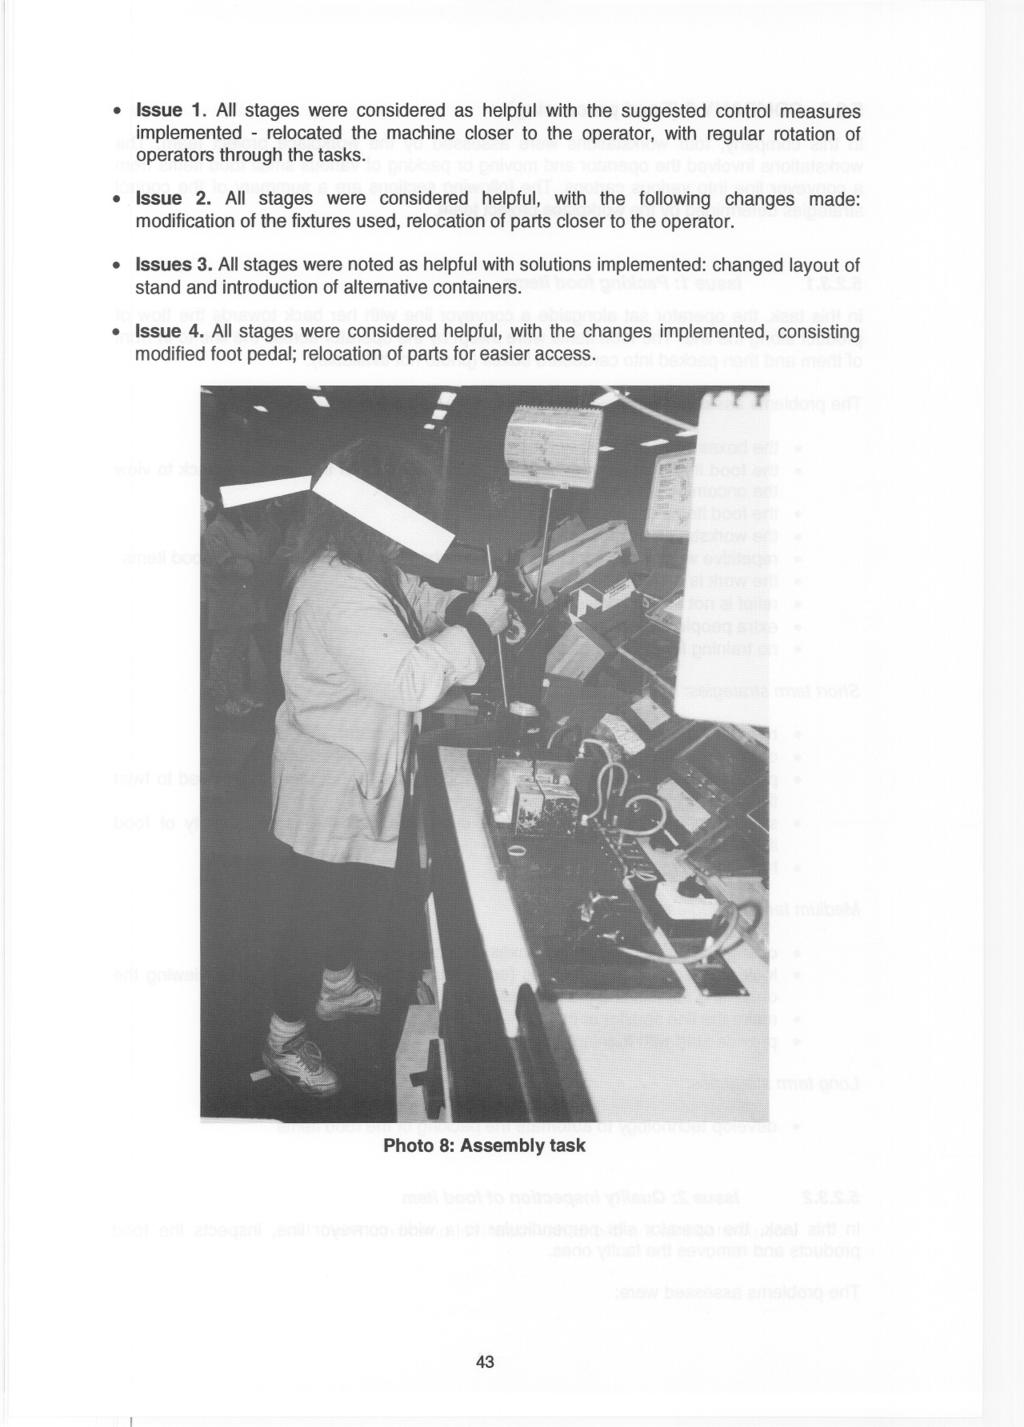 Issue 1. All stages were considered as helpful with the suggested control measures implemented - relocated the machine closer to the operator, with regular rotation of operators through the tasks.